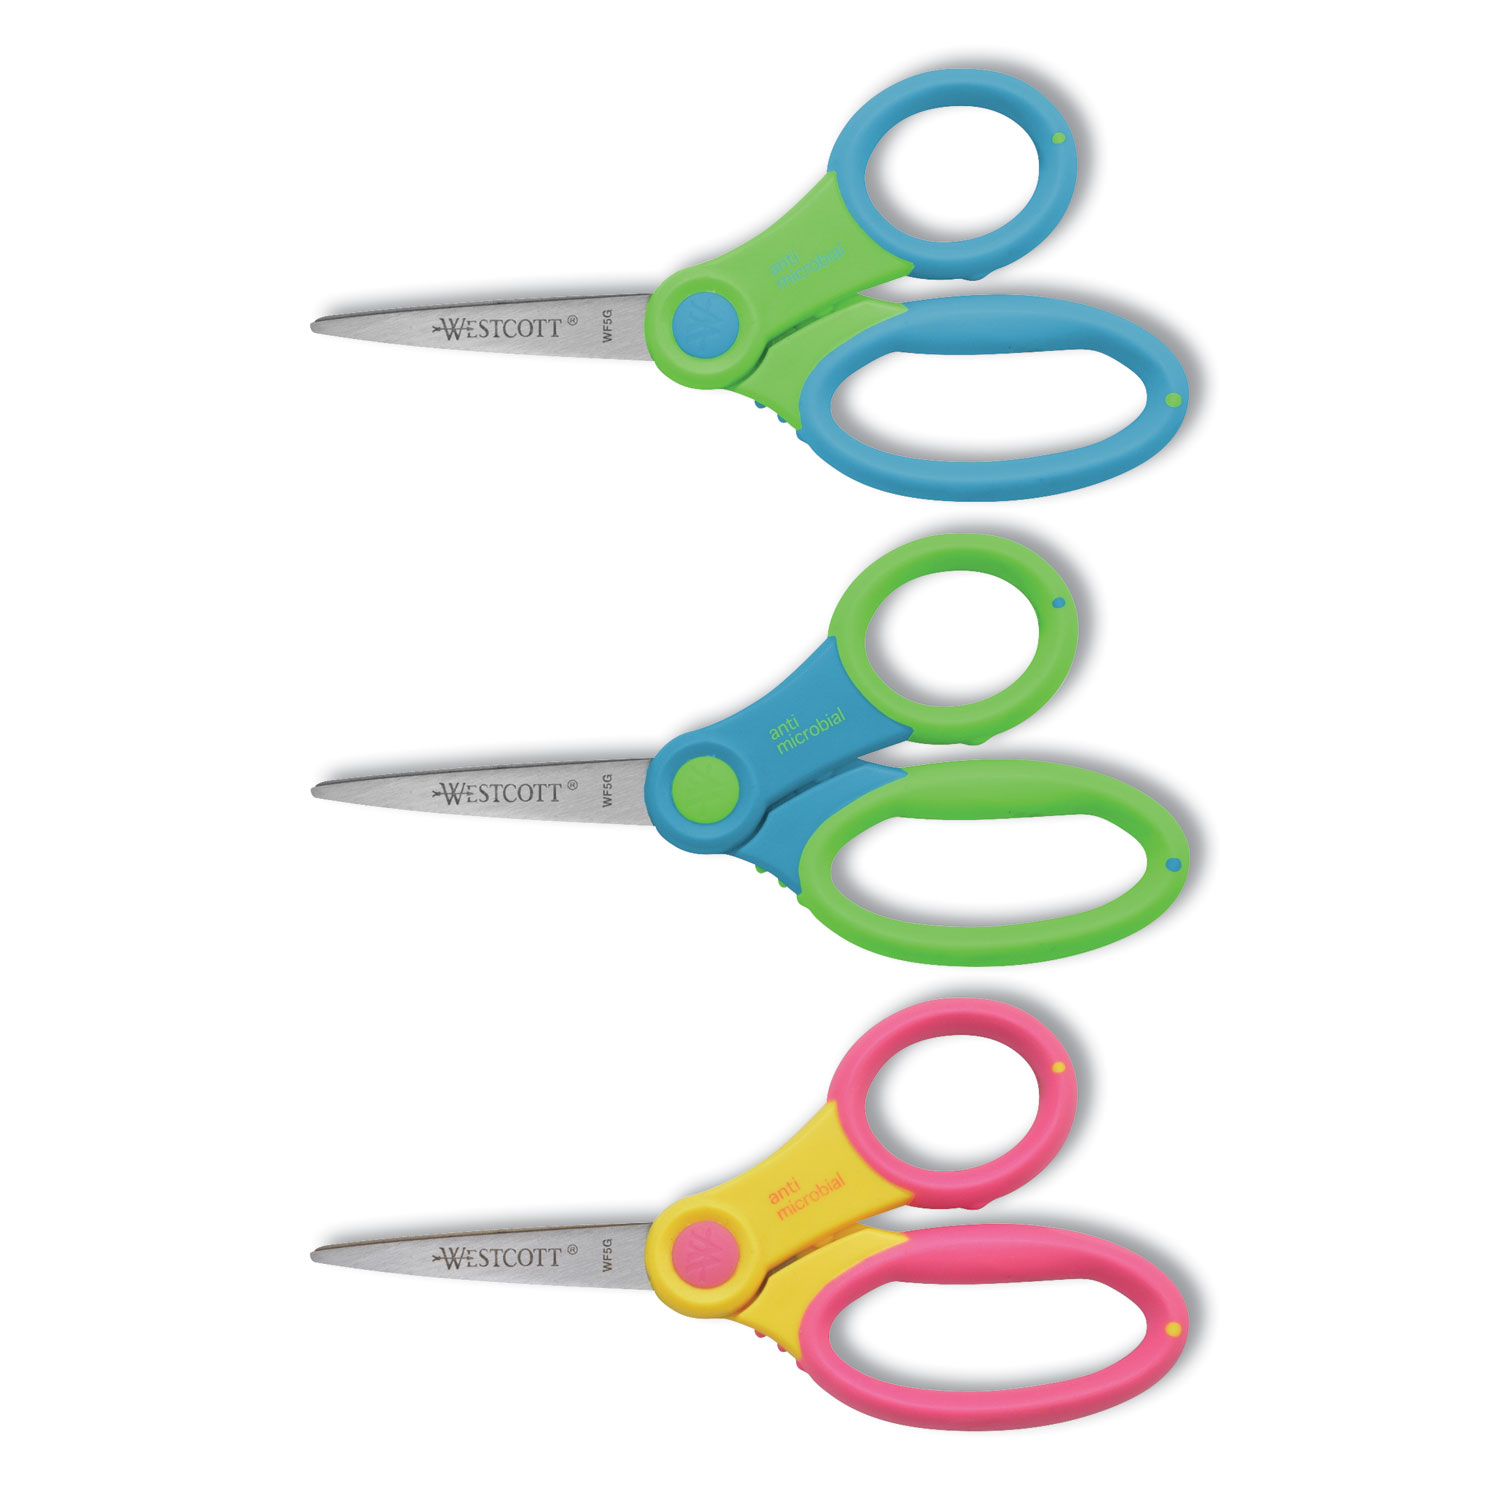  Westcott 14597 Ultra Soft Handle Scissors with Antimicrobial Protection, 5 Long, 2 Cut Length, Randomly Assorted Straight Handles (ACM14597) 